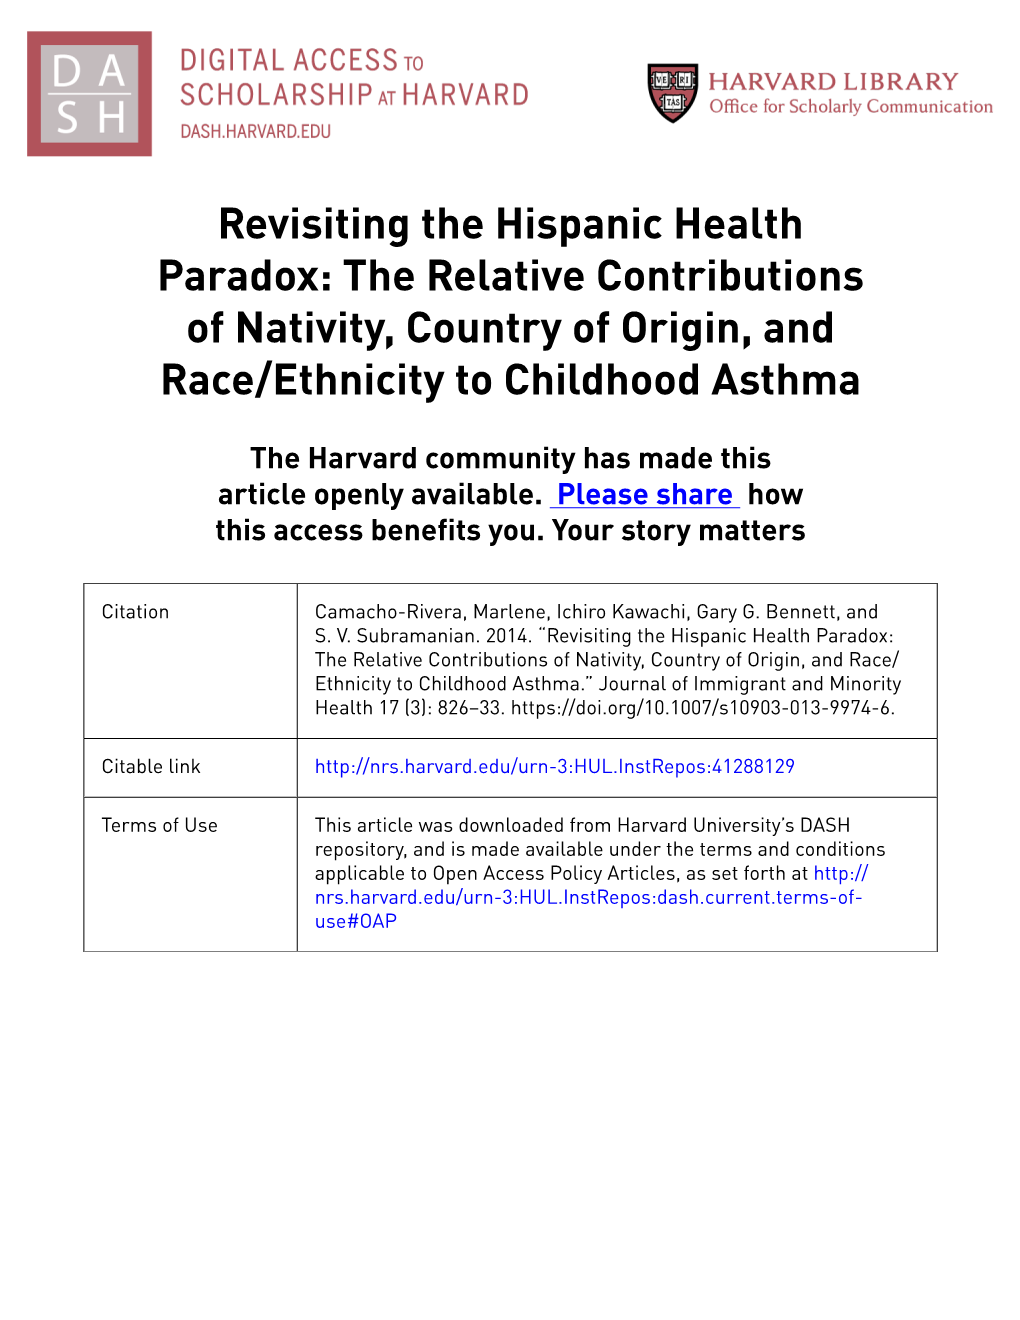 Revisiting the Hispanic Health Paradox: the Relative Contributions of Nativity, Country of Origin, and Race/Ethnicity to Childhood Asthma